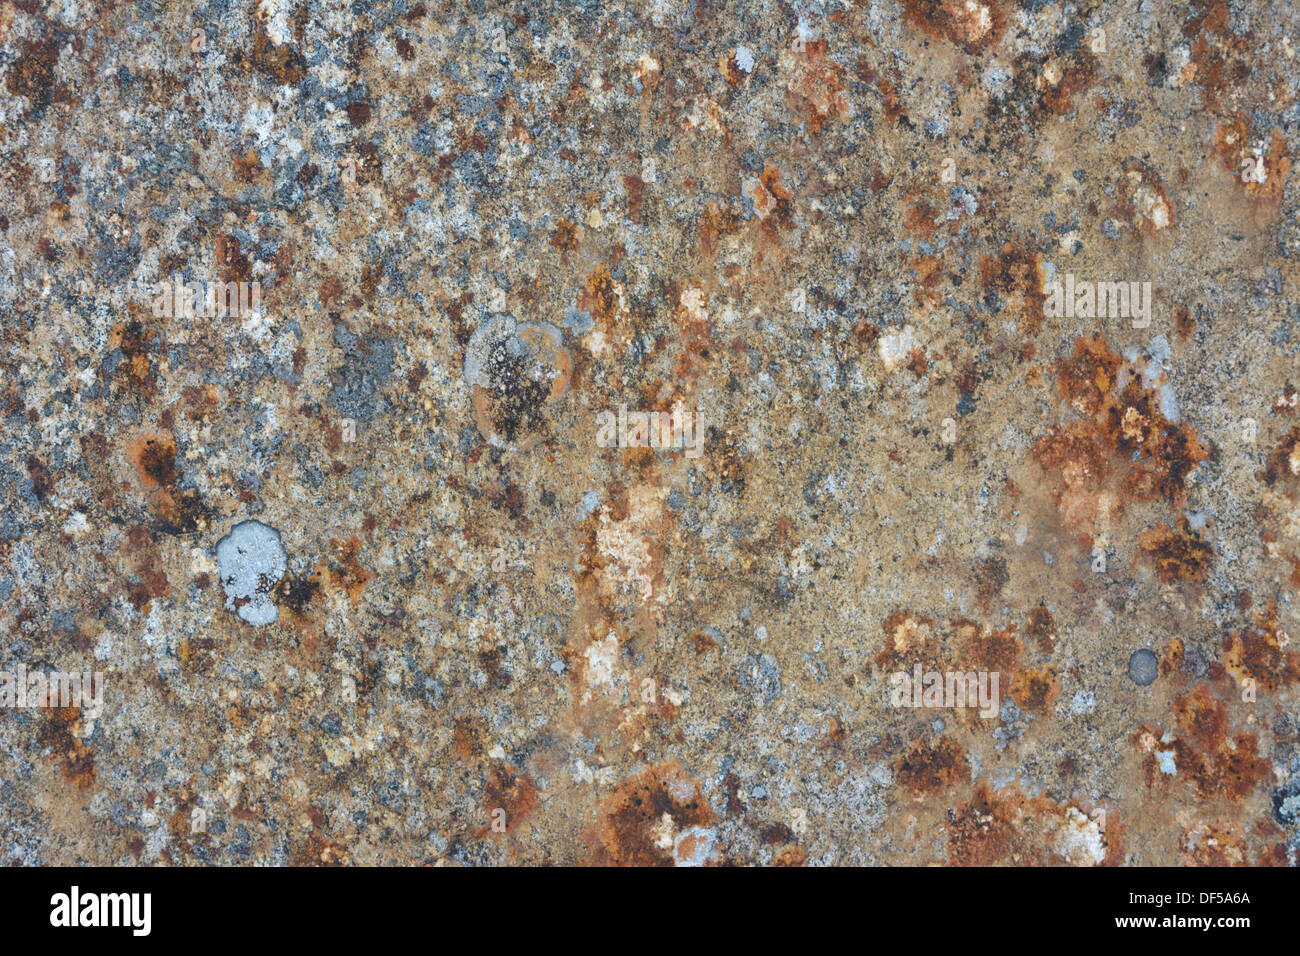 Rock textures for backgrounds ot texture files. Stock Photo